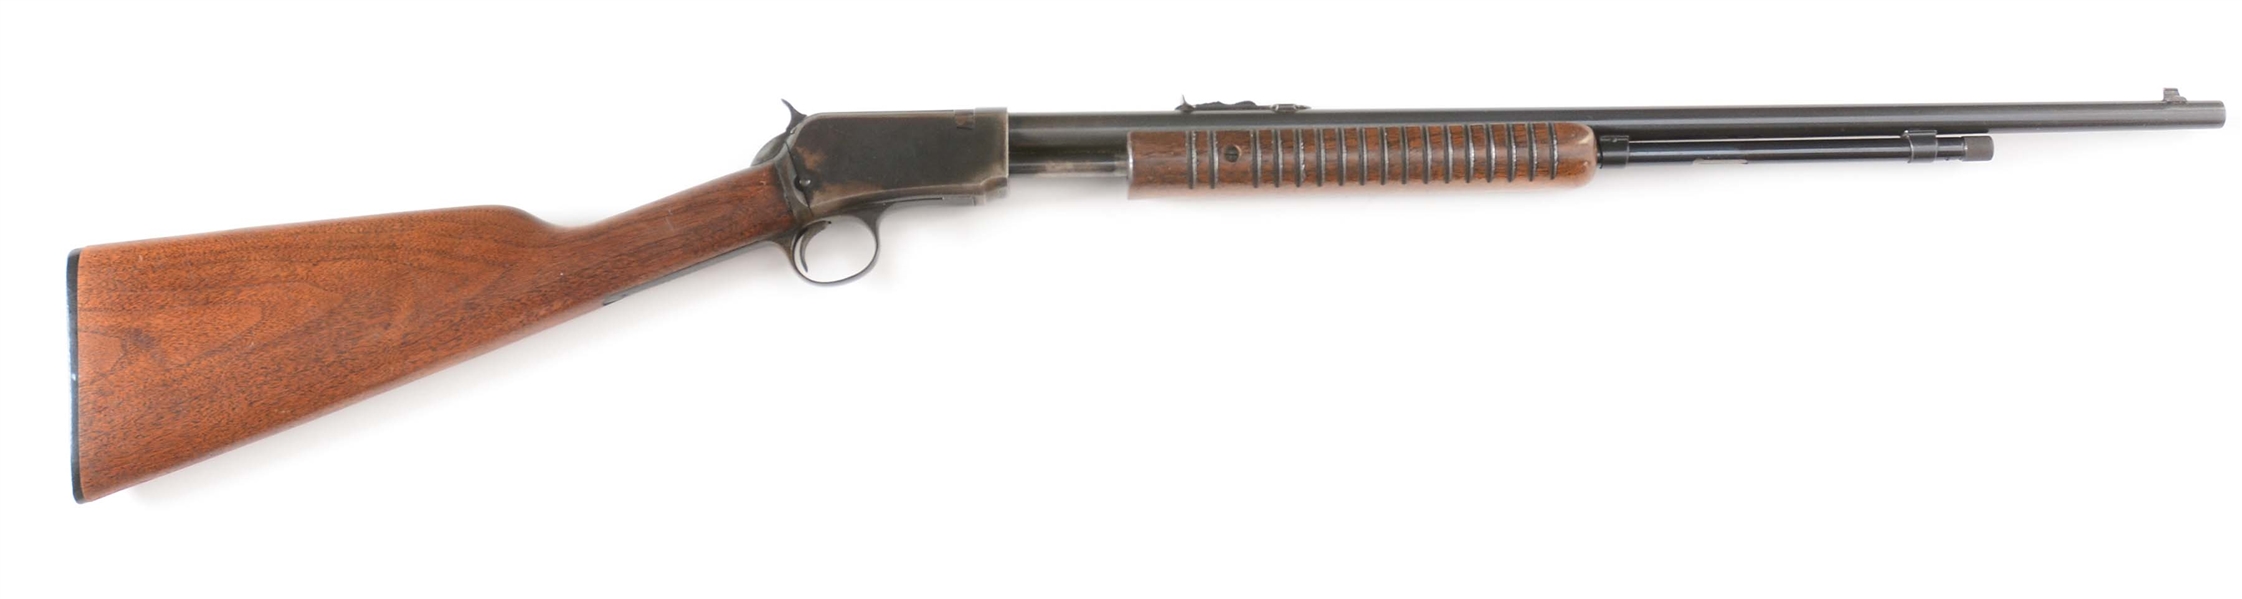 (C) WINCHESTER MODEL 62A SLIDE ACTION .22 RIFLE (1957).